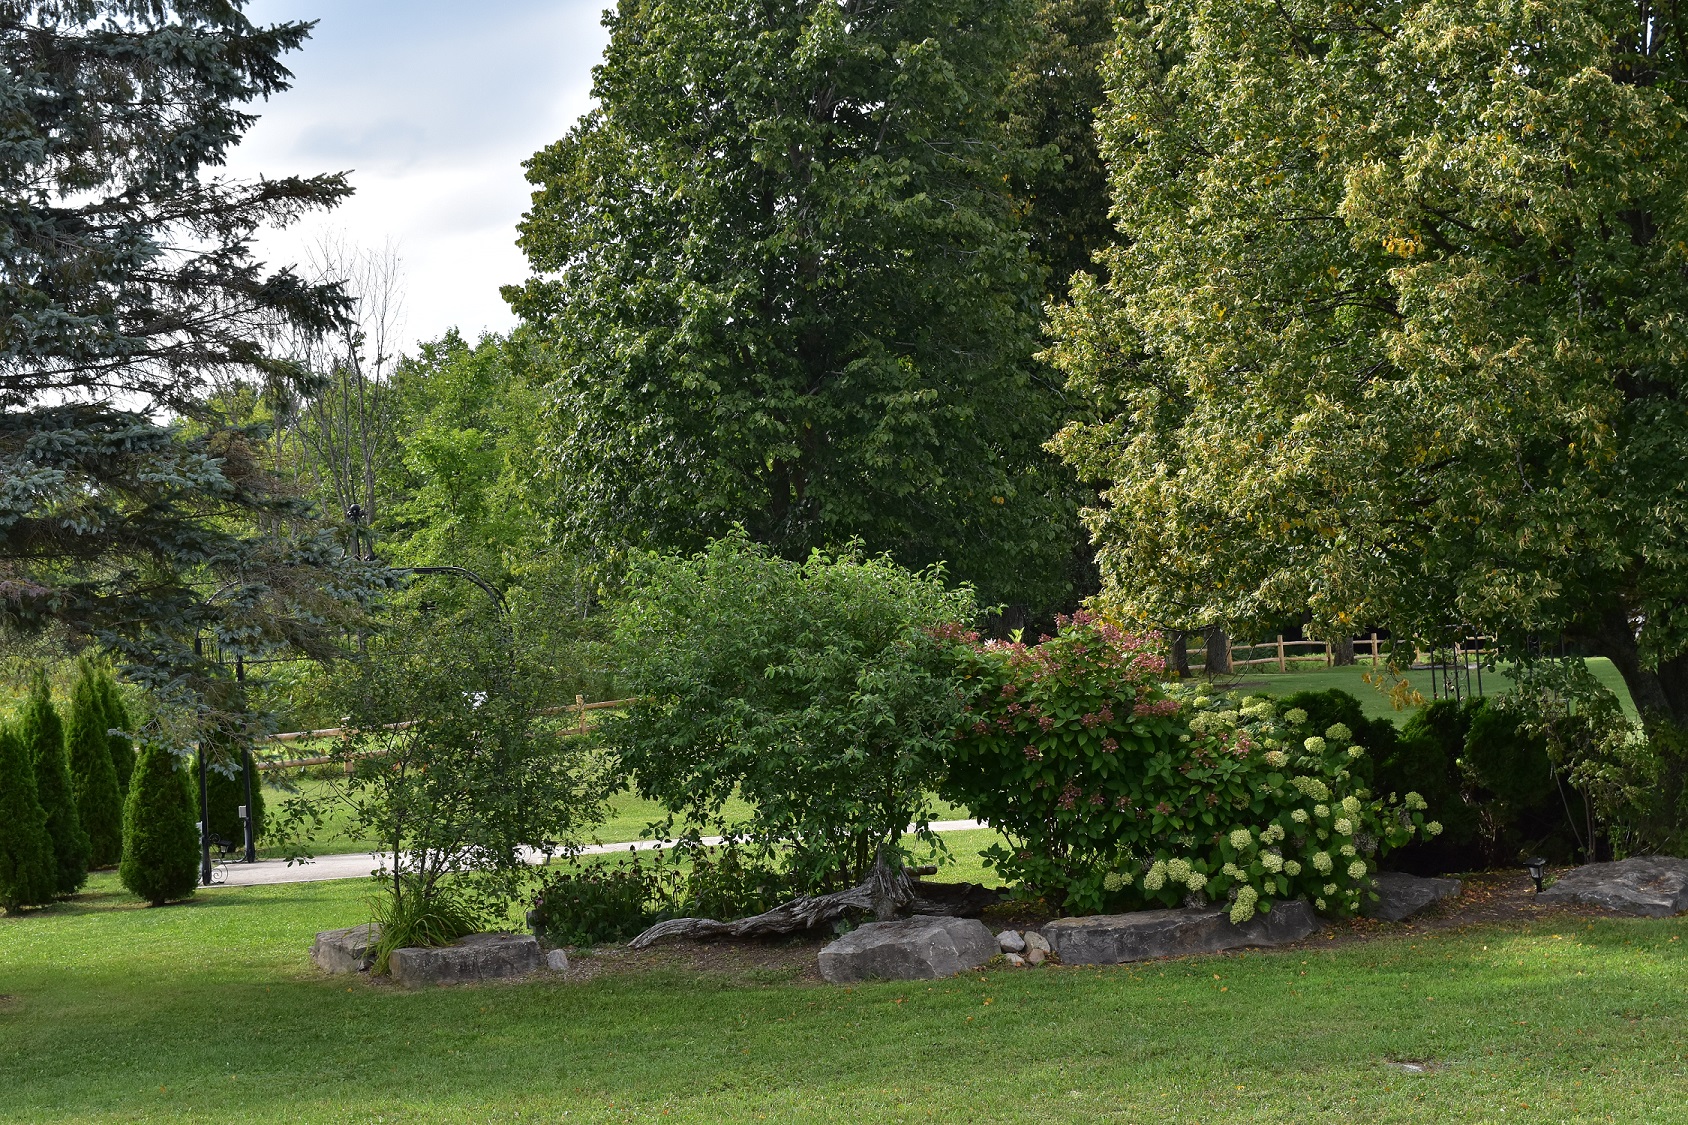 garden with trees, shrubs, flowers and rocks